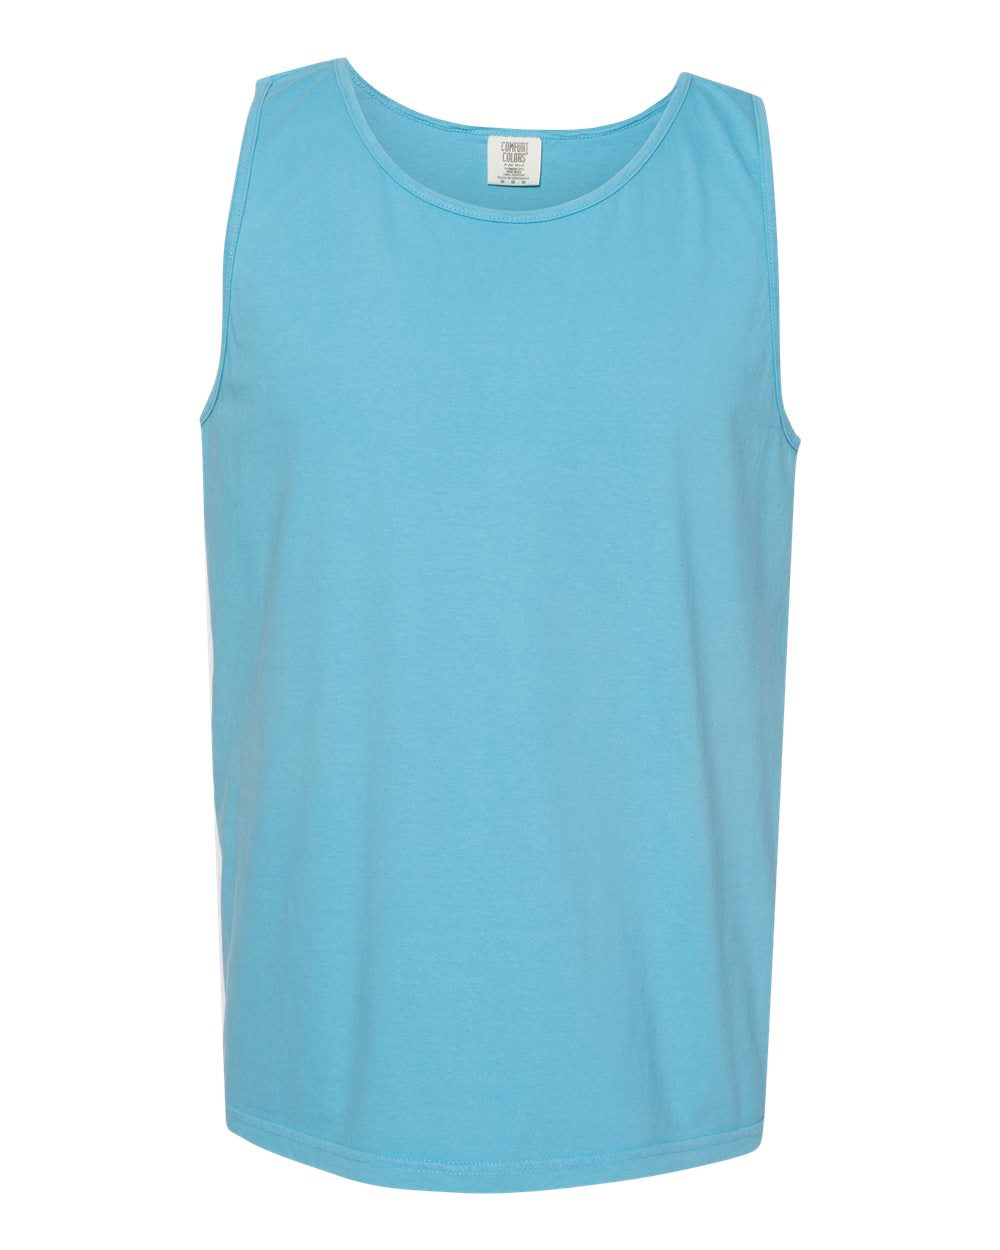 Comfort Colors - Garment-Dyed Heavyweight Tank Top - 9360